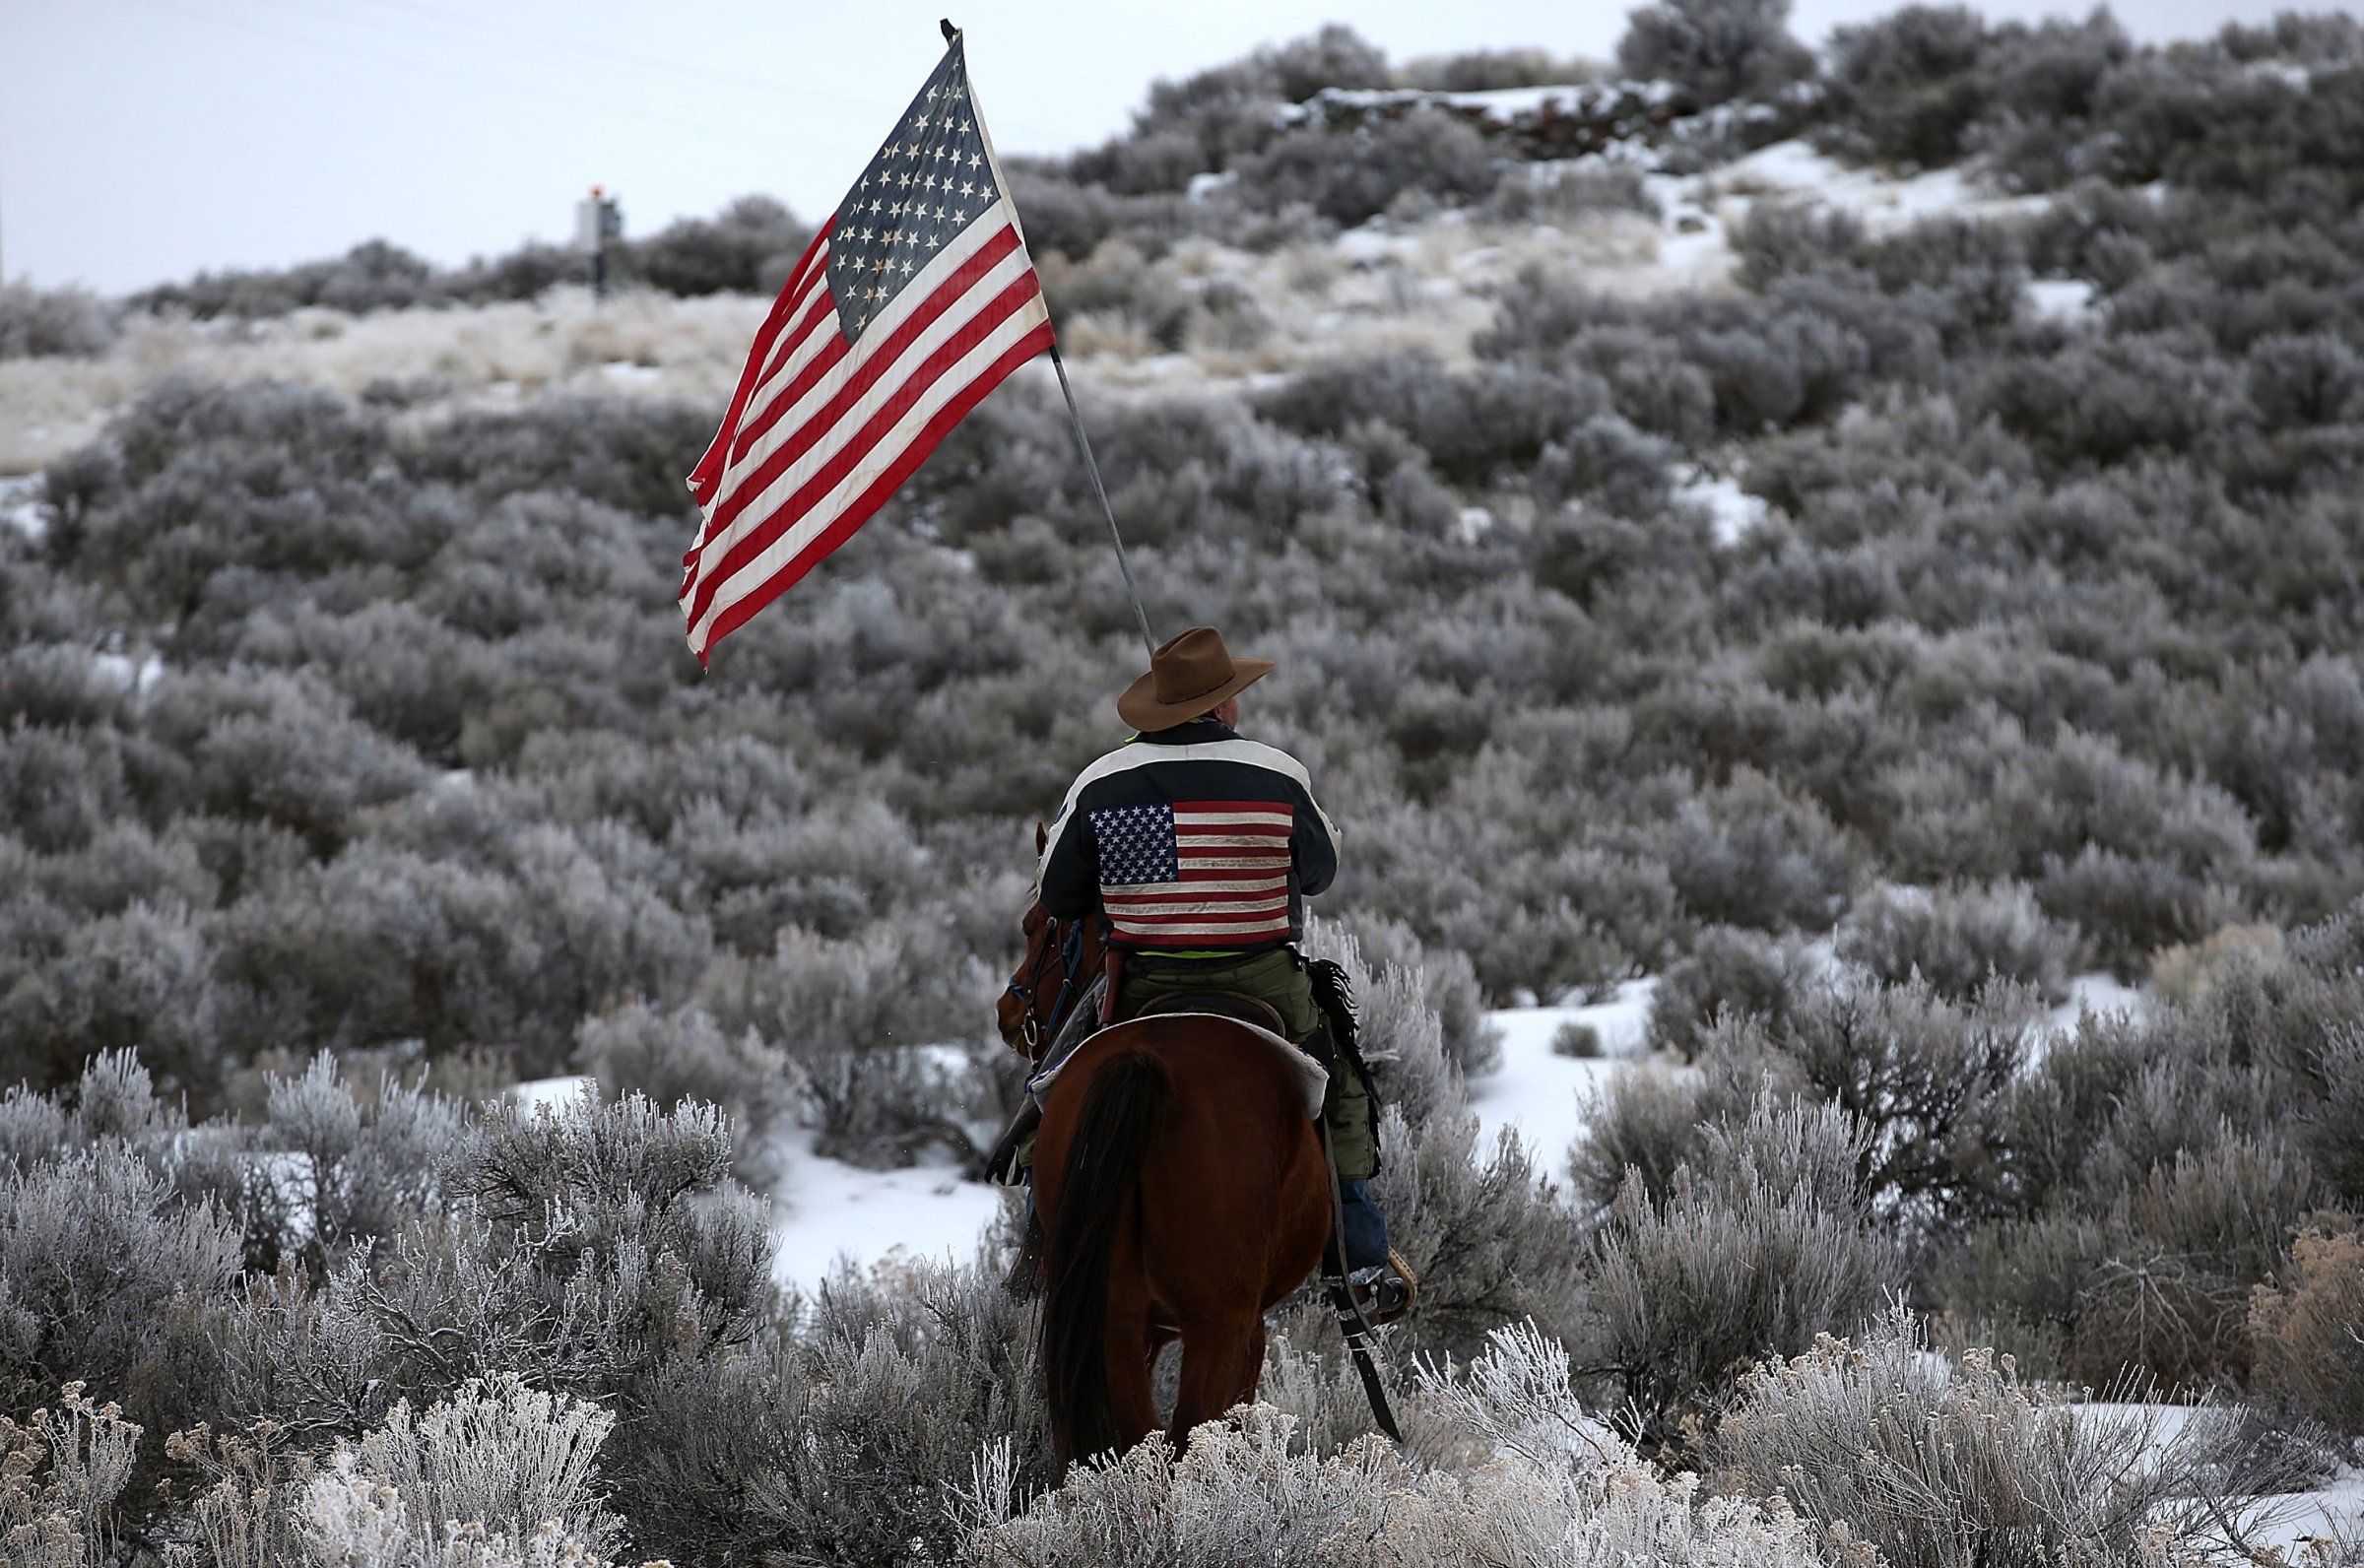 Dwayne Ehmer carries an American flag as he rides his horse on the Malheur National Wildlife Refuge near Burns, Ore., on Jan. 7, 2016.